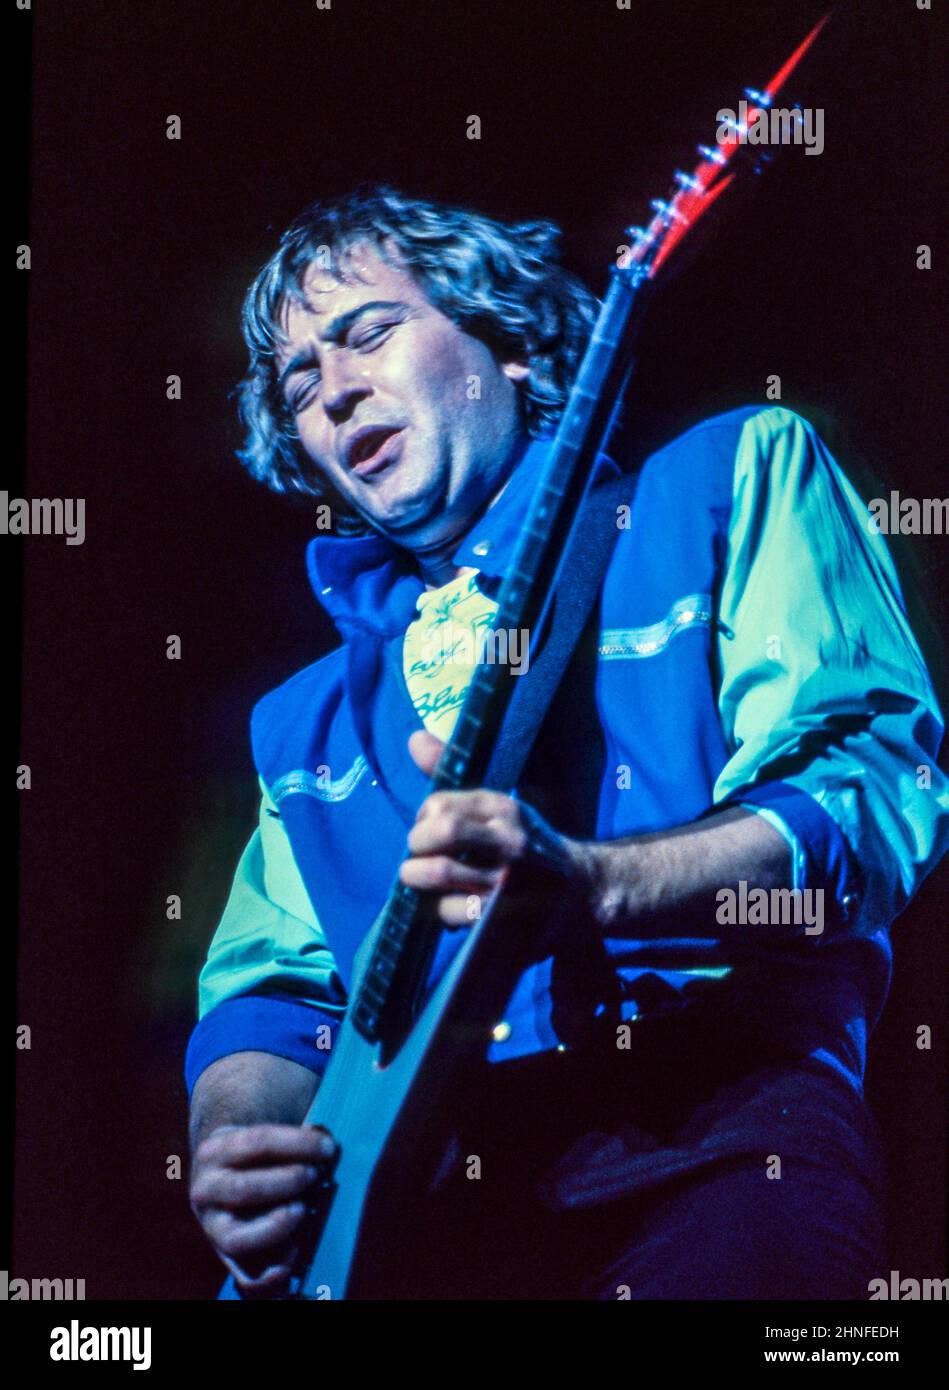 Guitarist Mick Jones of Anglo-American band Foreigner performing at Wembley Arena, London in 1982. Stock Photo